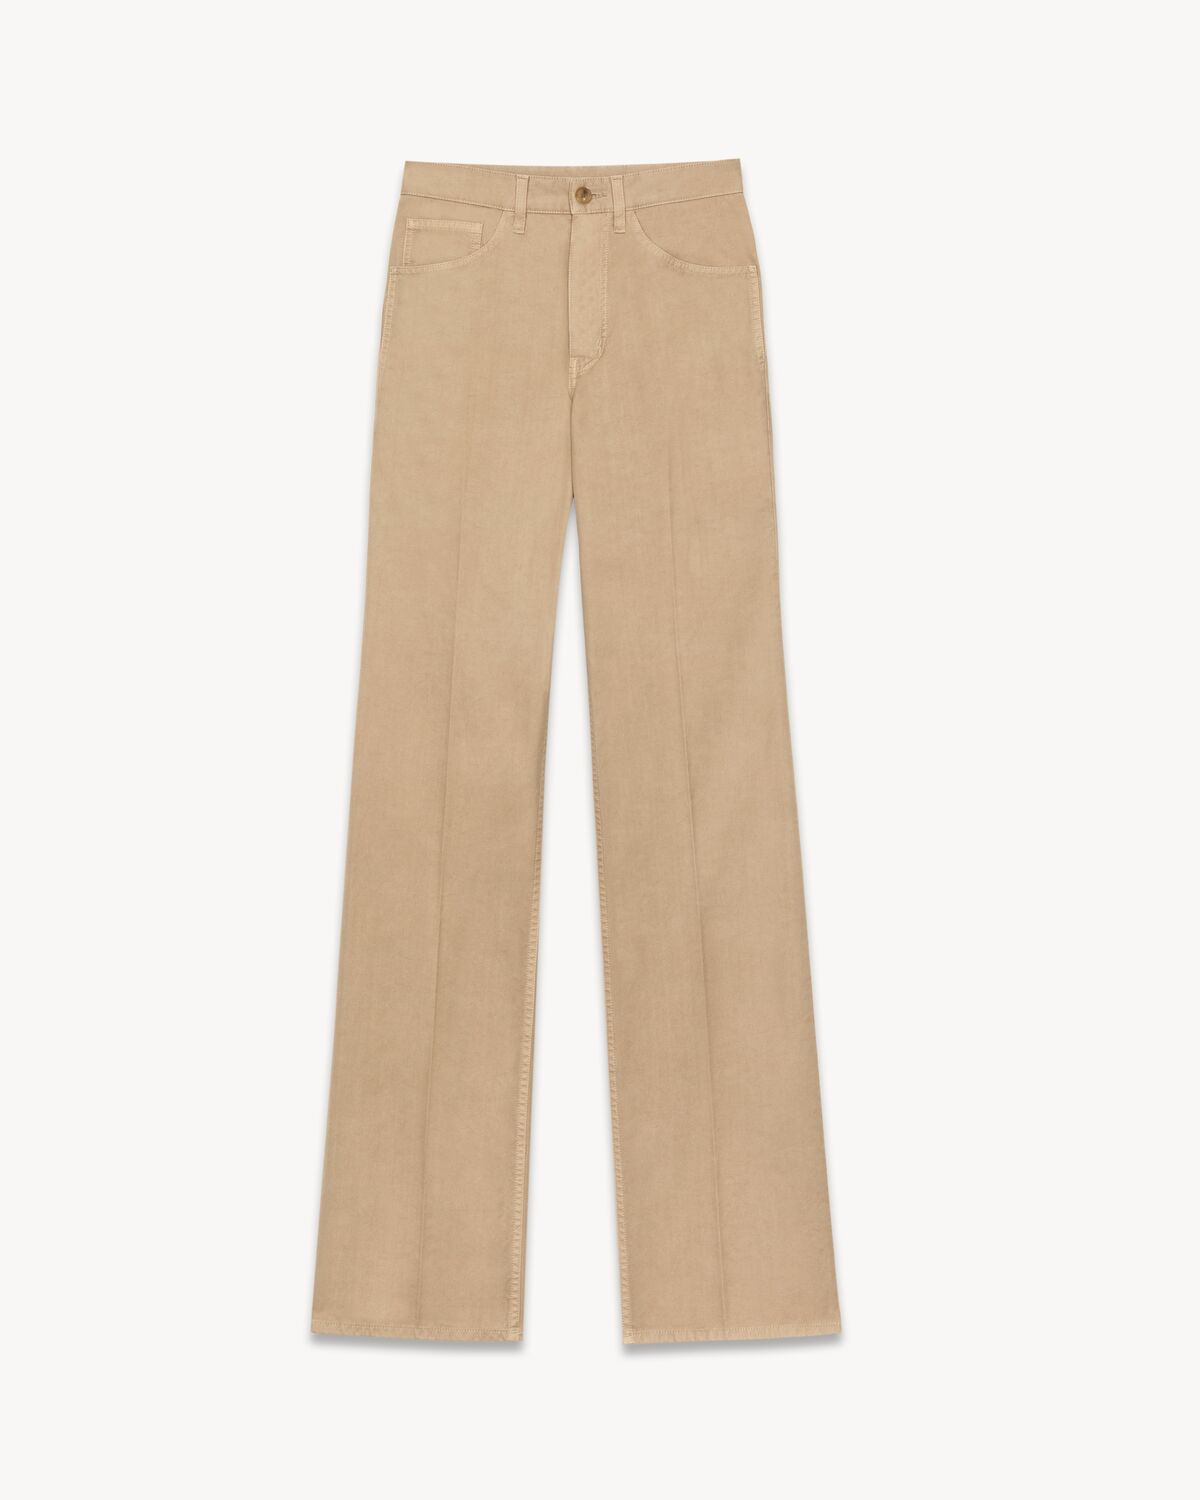 CLYDE pants in cotton